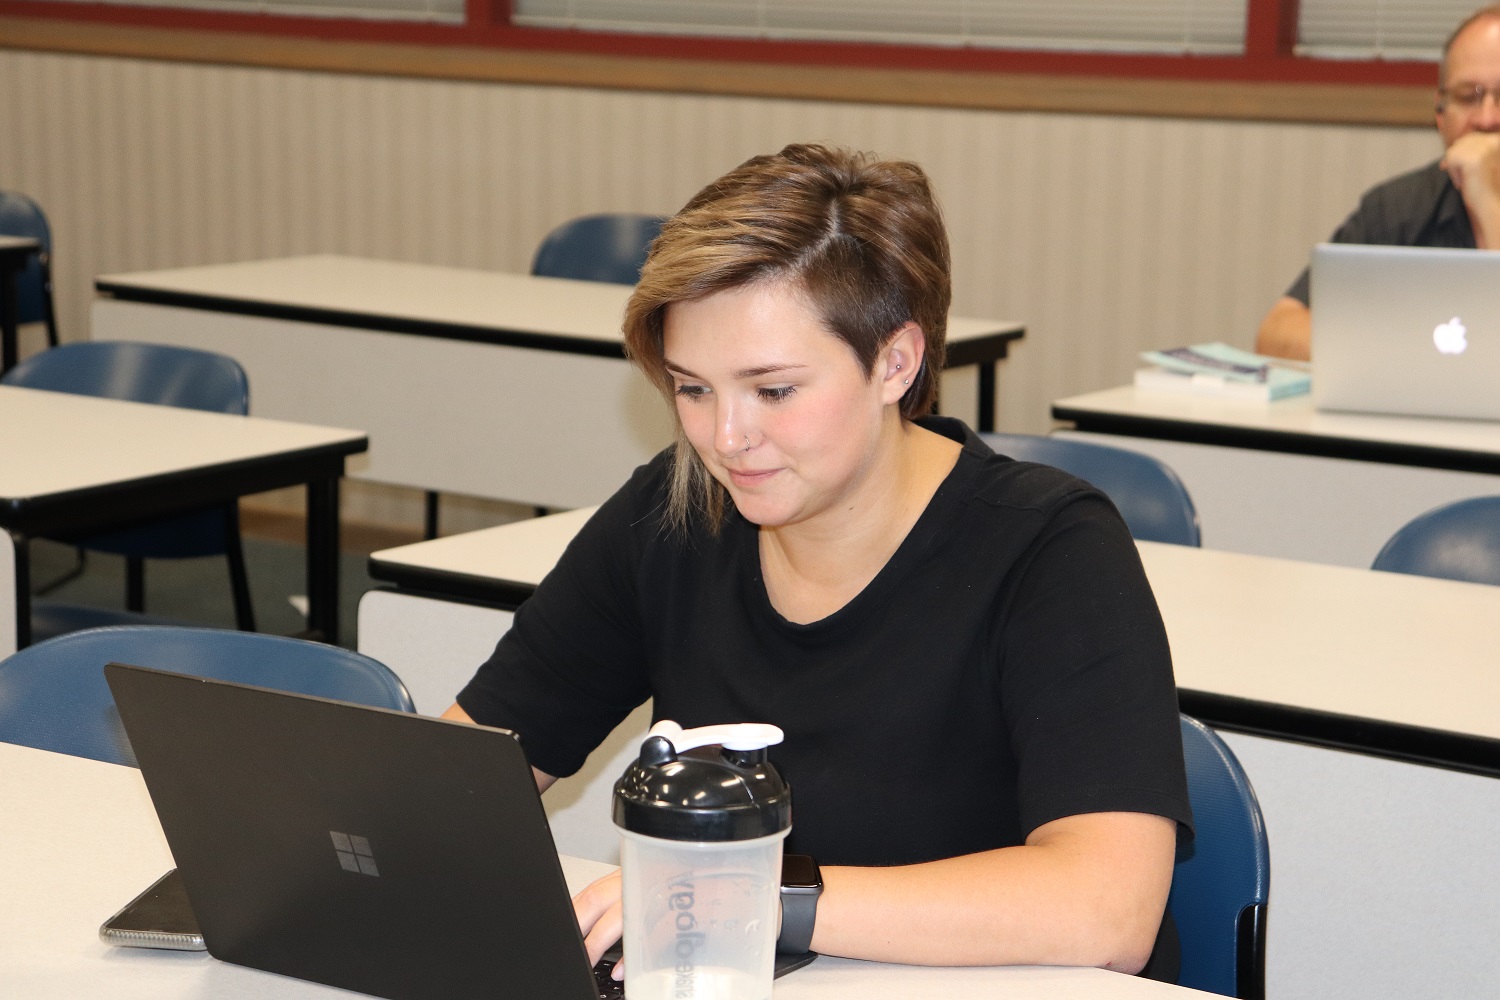 Student setting at a desk in grad class with computer.